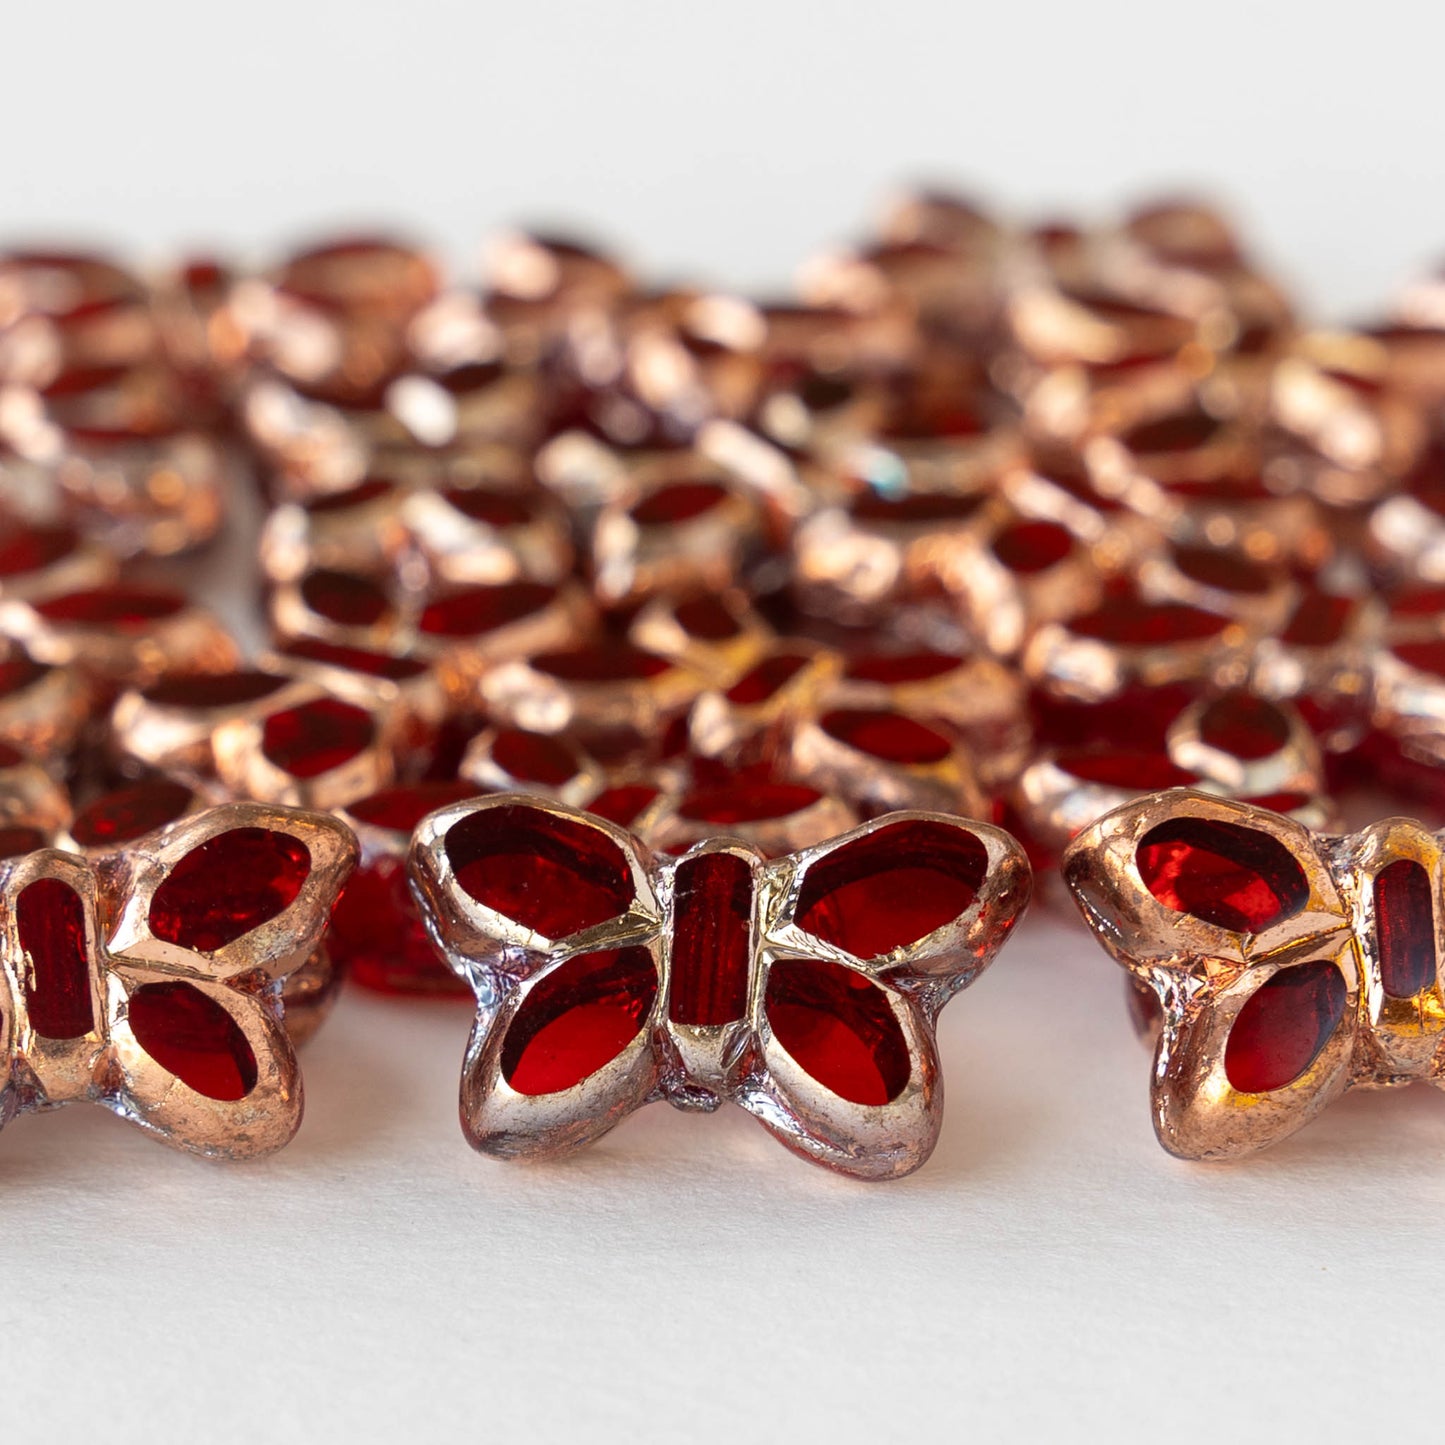 Glass Butterfly Beads - Red with Copper - 4 beads